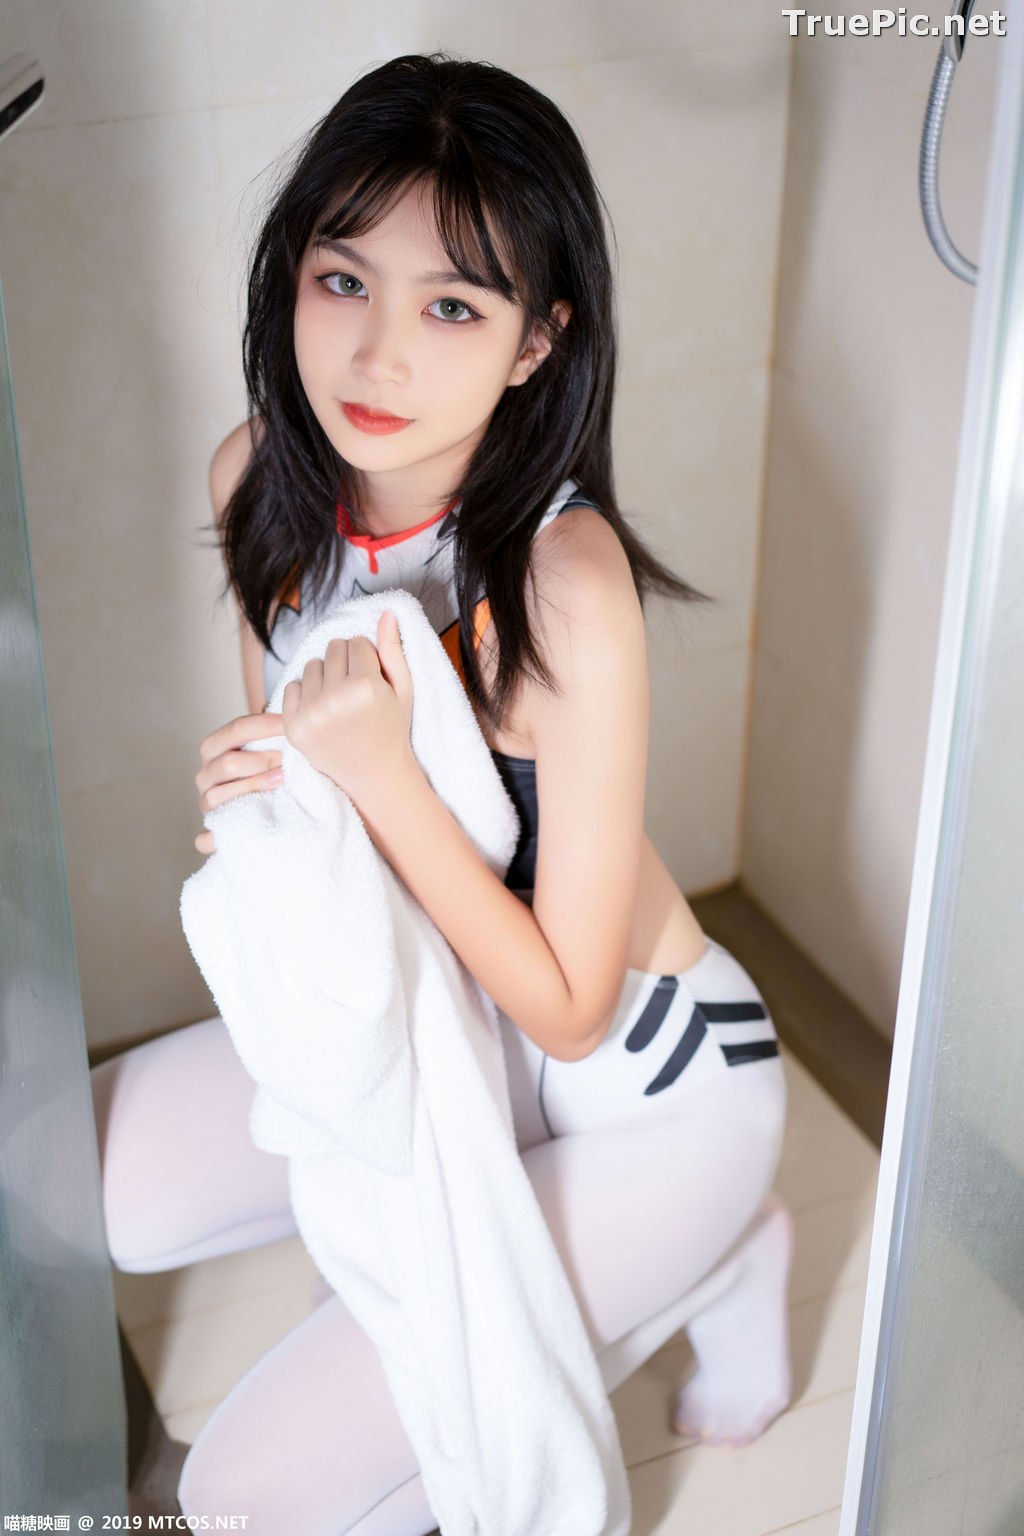 Image MTCos 喵糖映画 Vol.031 – Chinese Cute Model – Evangelion Aya Polly Cosplay - TruePic.net - Picture-40